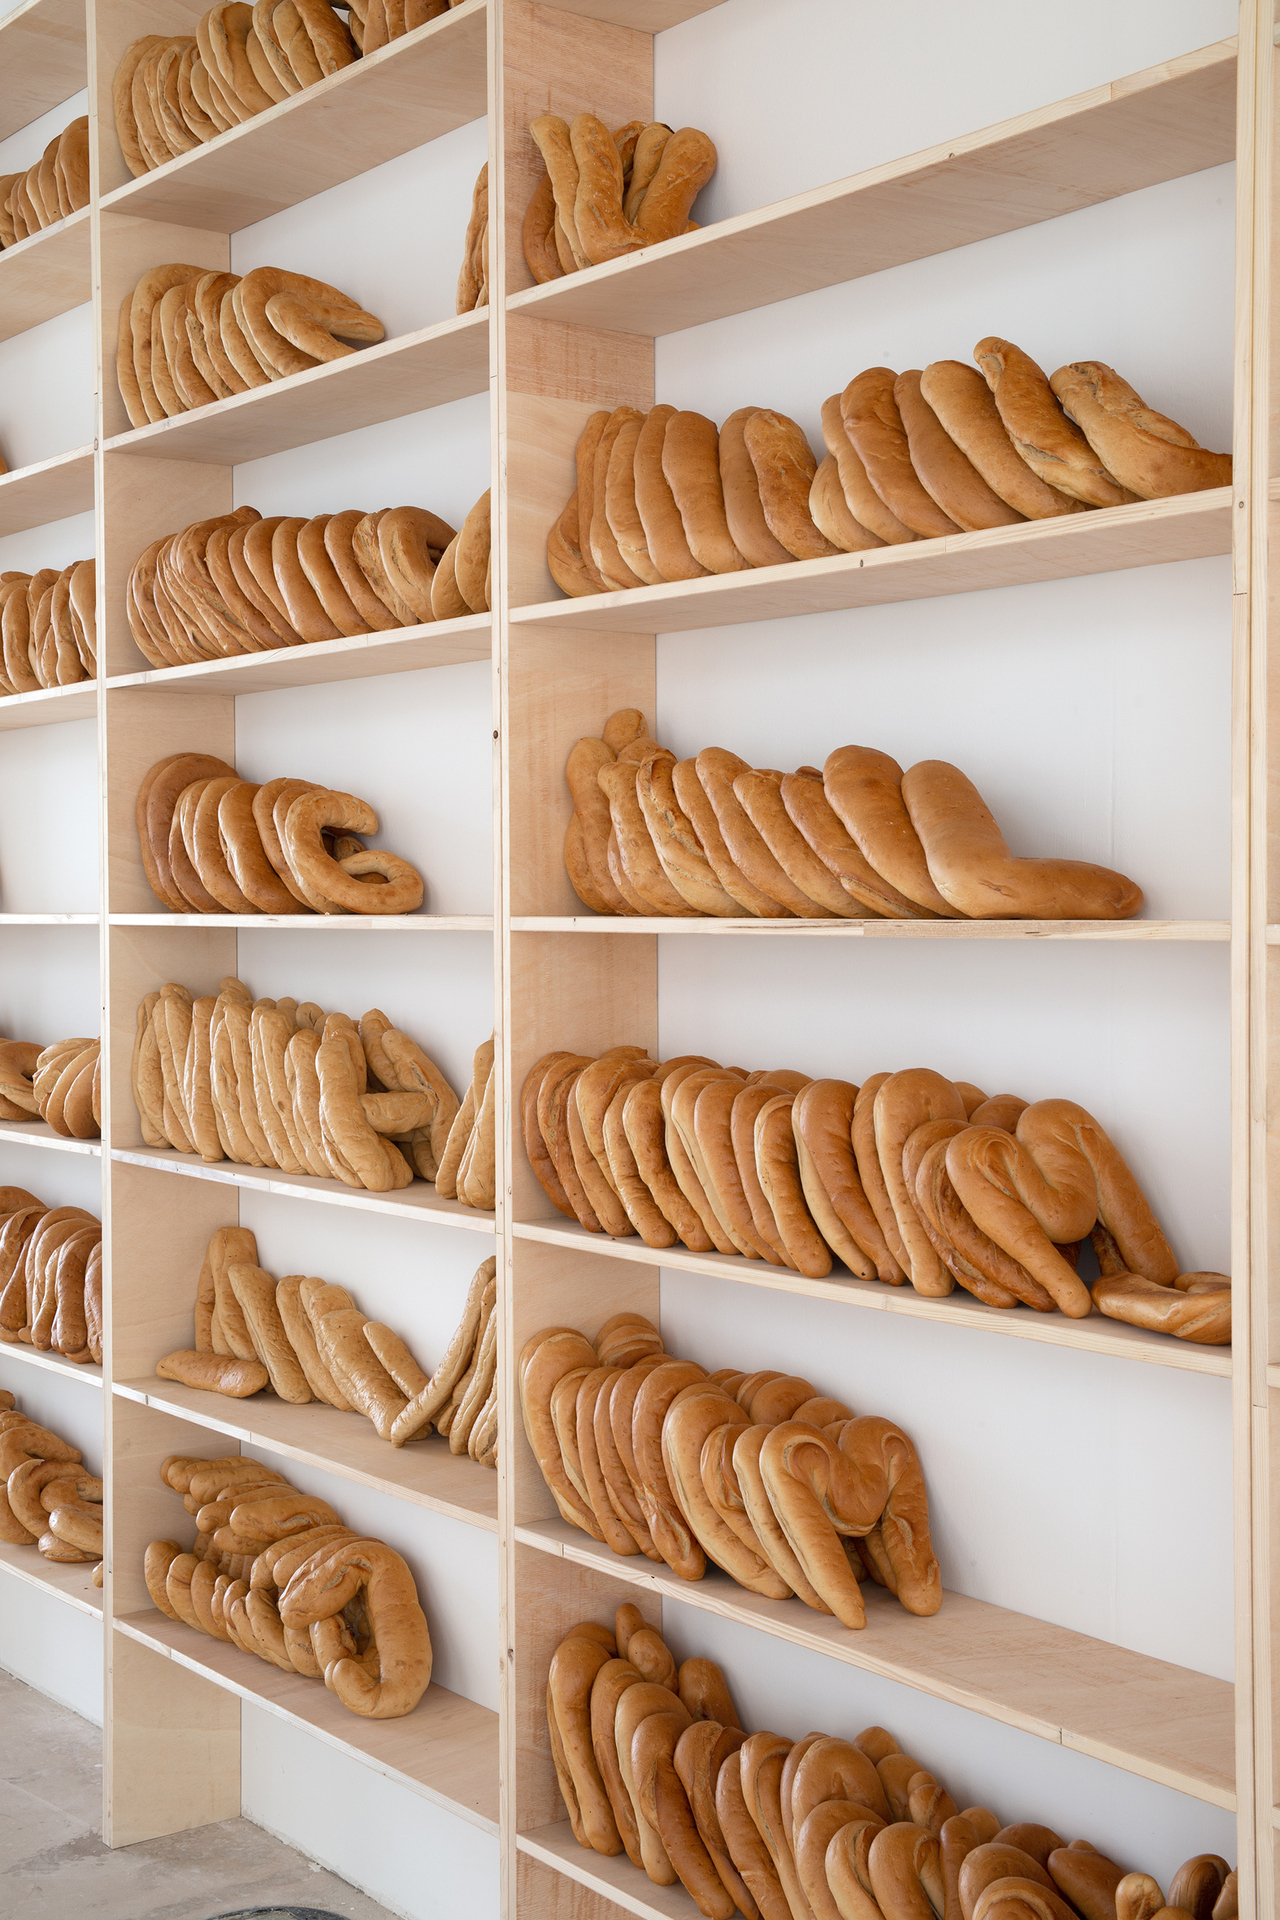 Uri Aran, Bread Library, 2020/22 wood, approx. 600 pieces of bread with special thanks to Bäckerei Beckmanns, Dortmund, Photo: Jens Franke Courtesy: The artist and Sadie Coles HQ